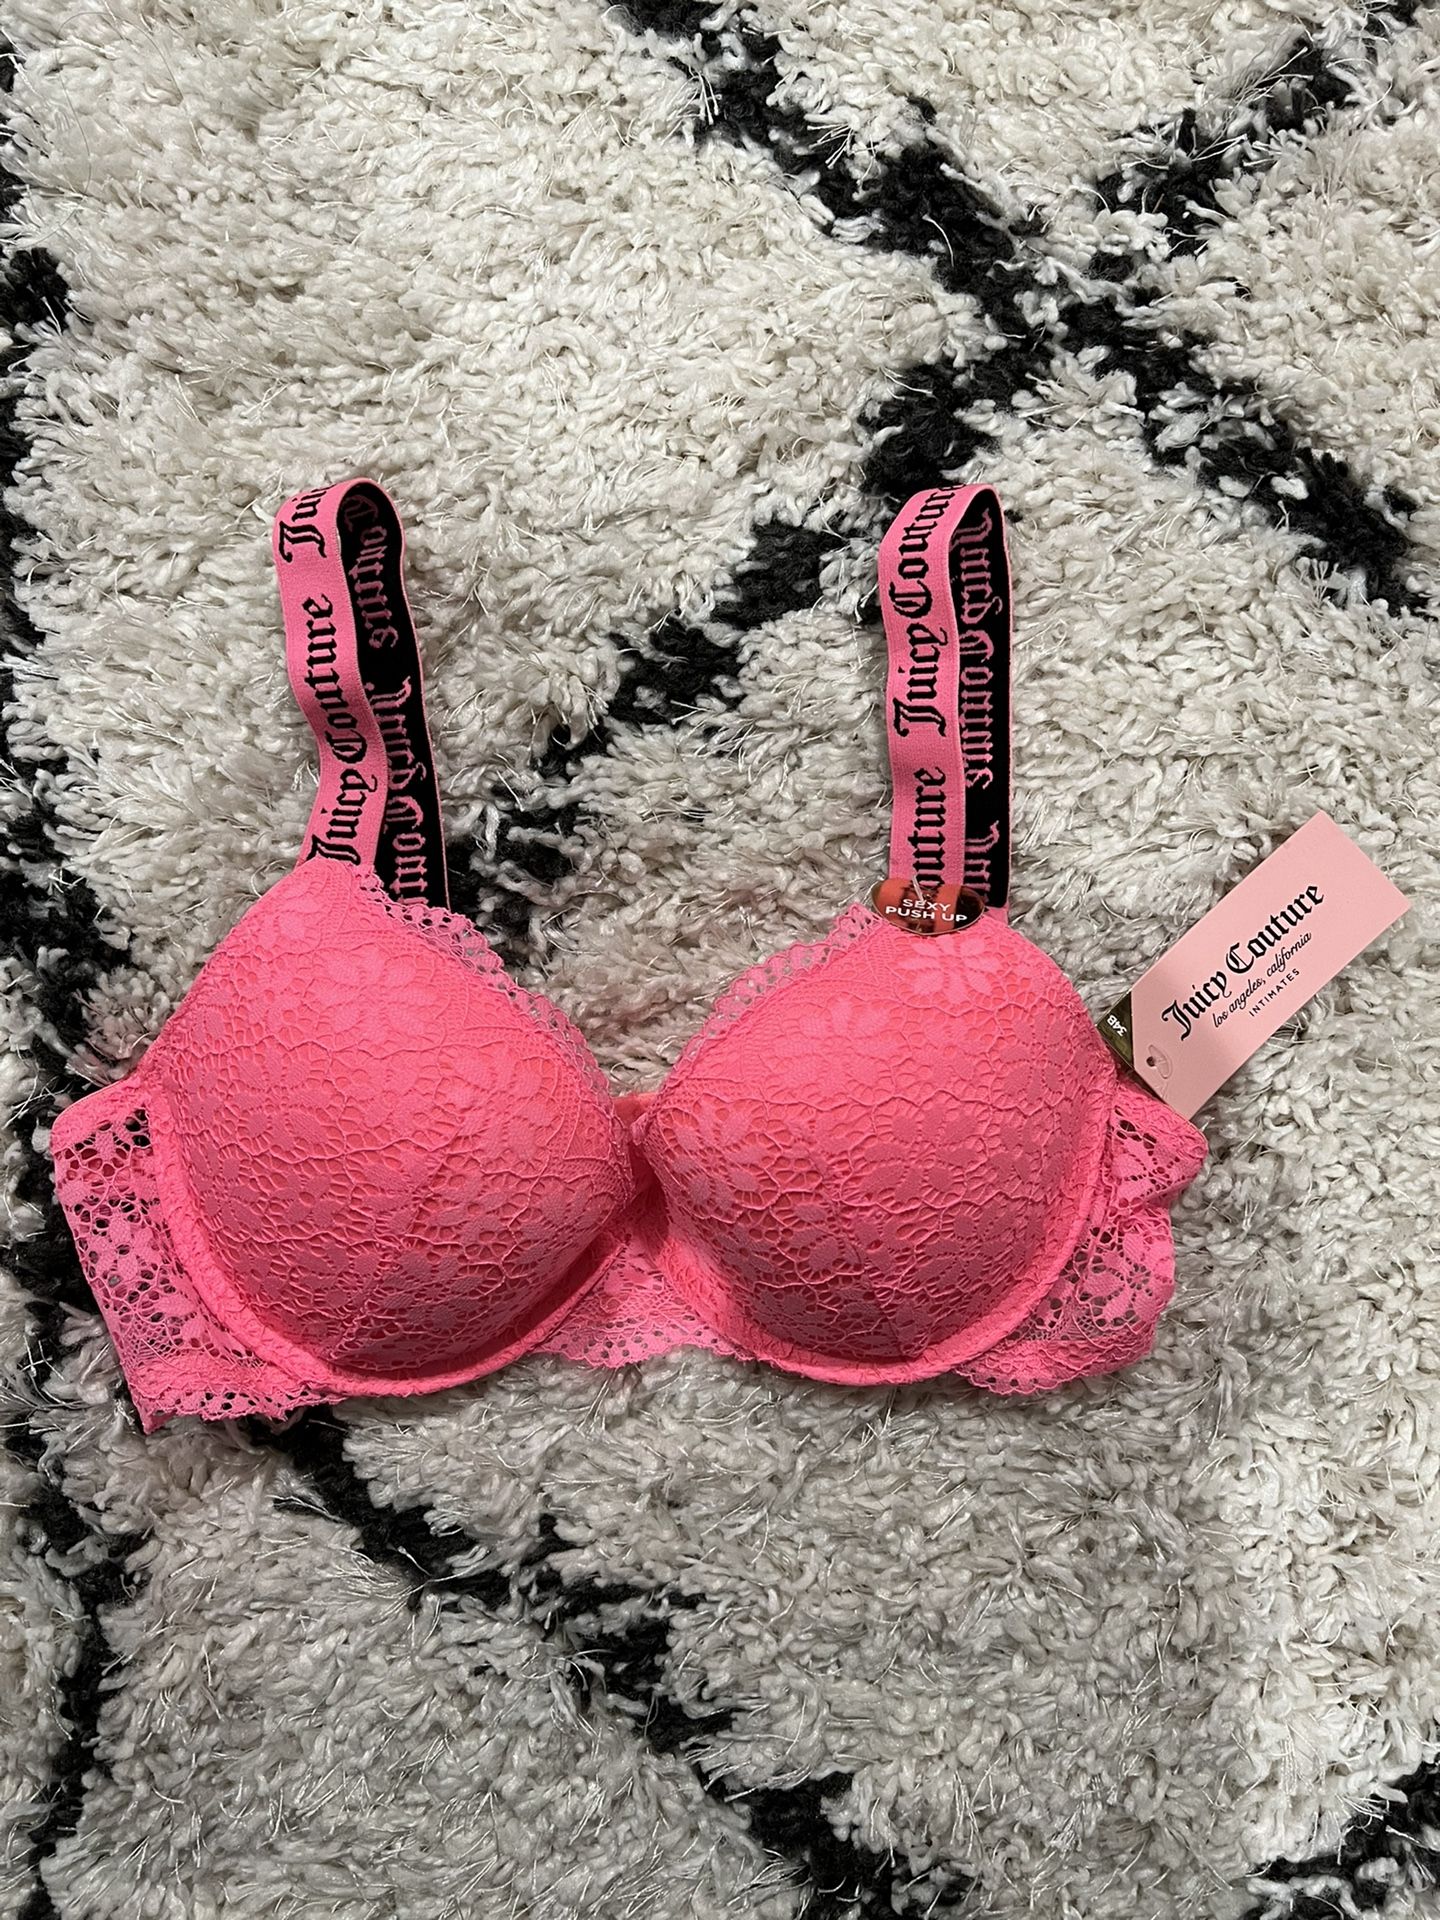 Juicy Couture velvet triangle bra with branded elastic in pink (part of a  set)